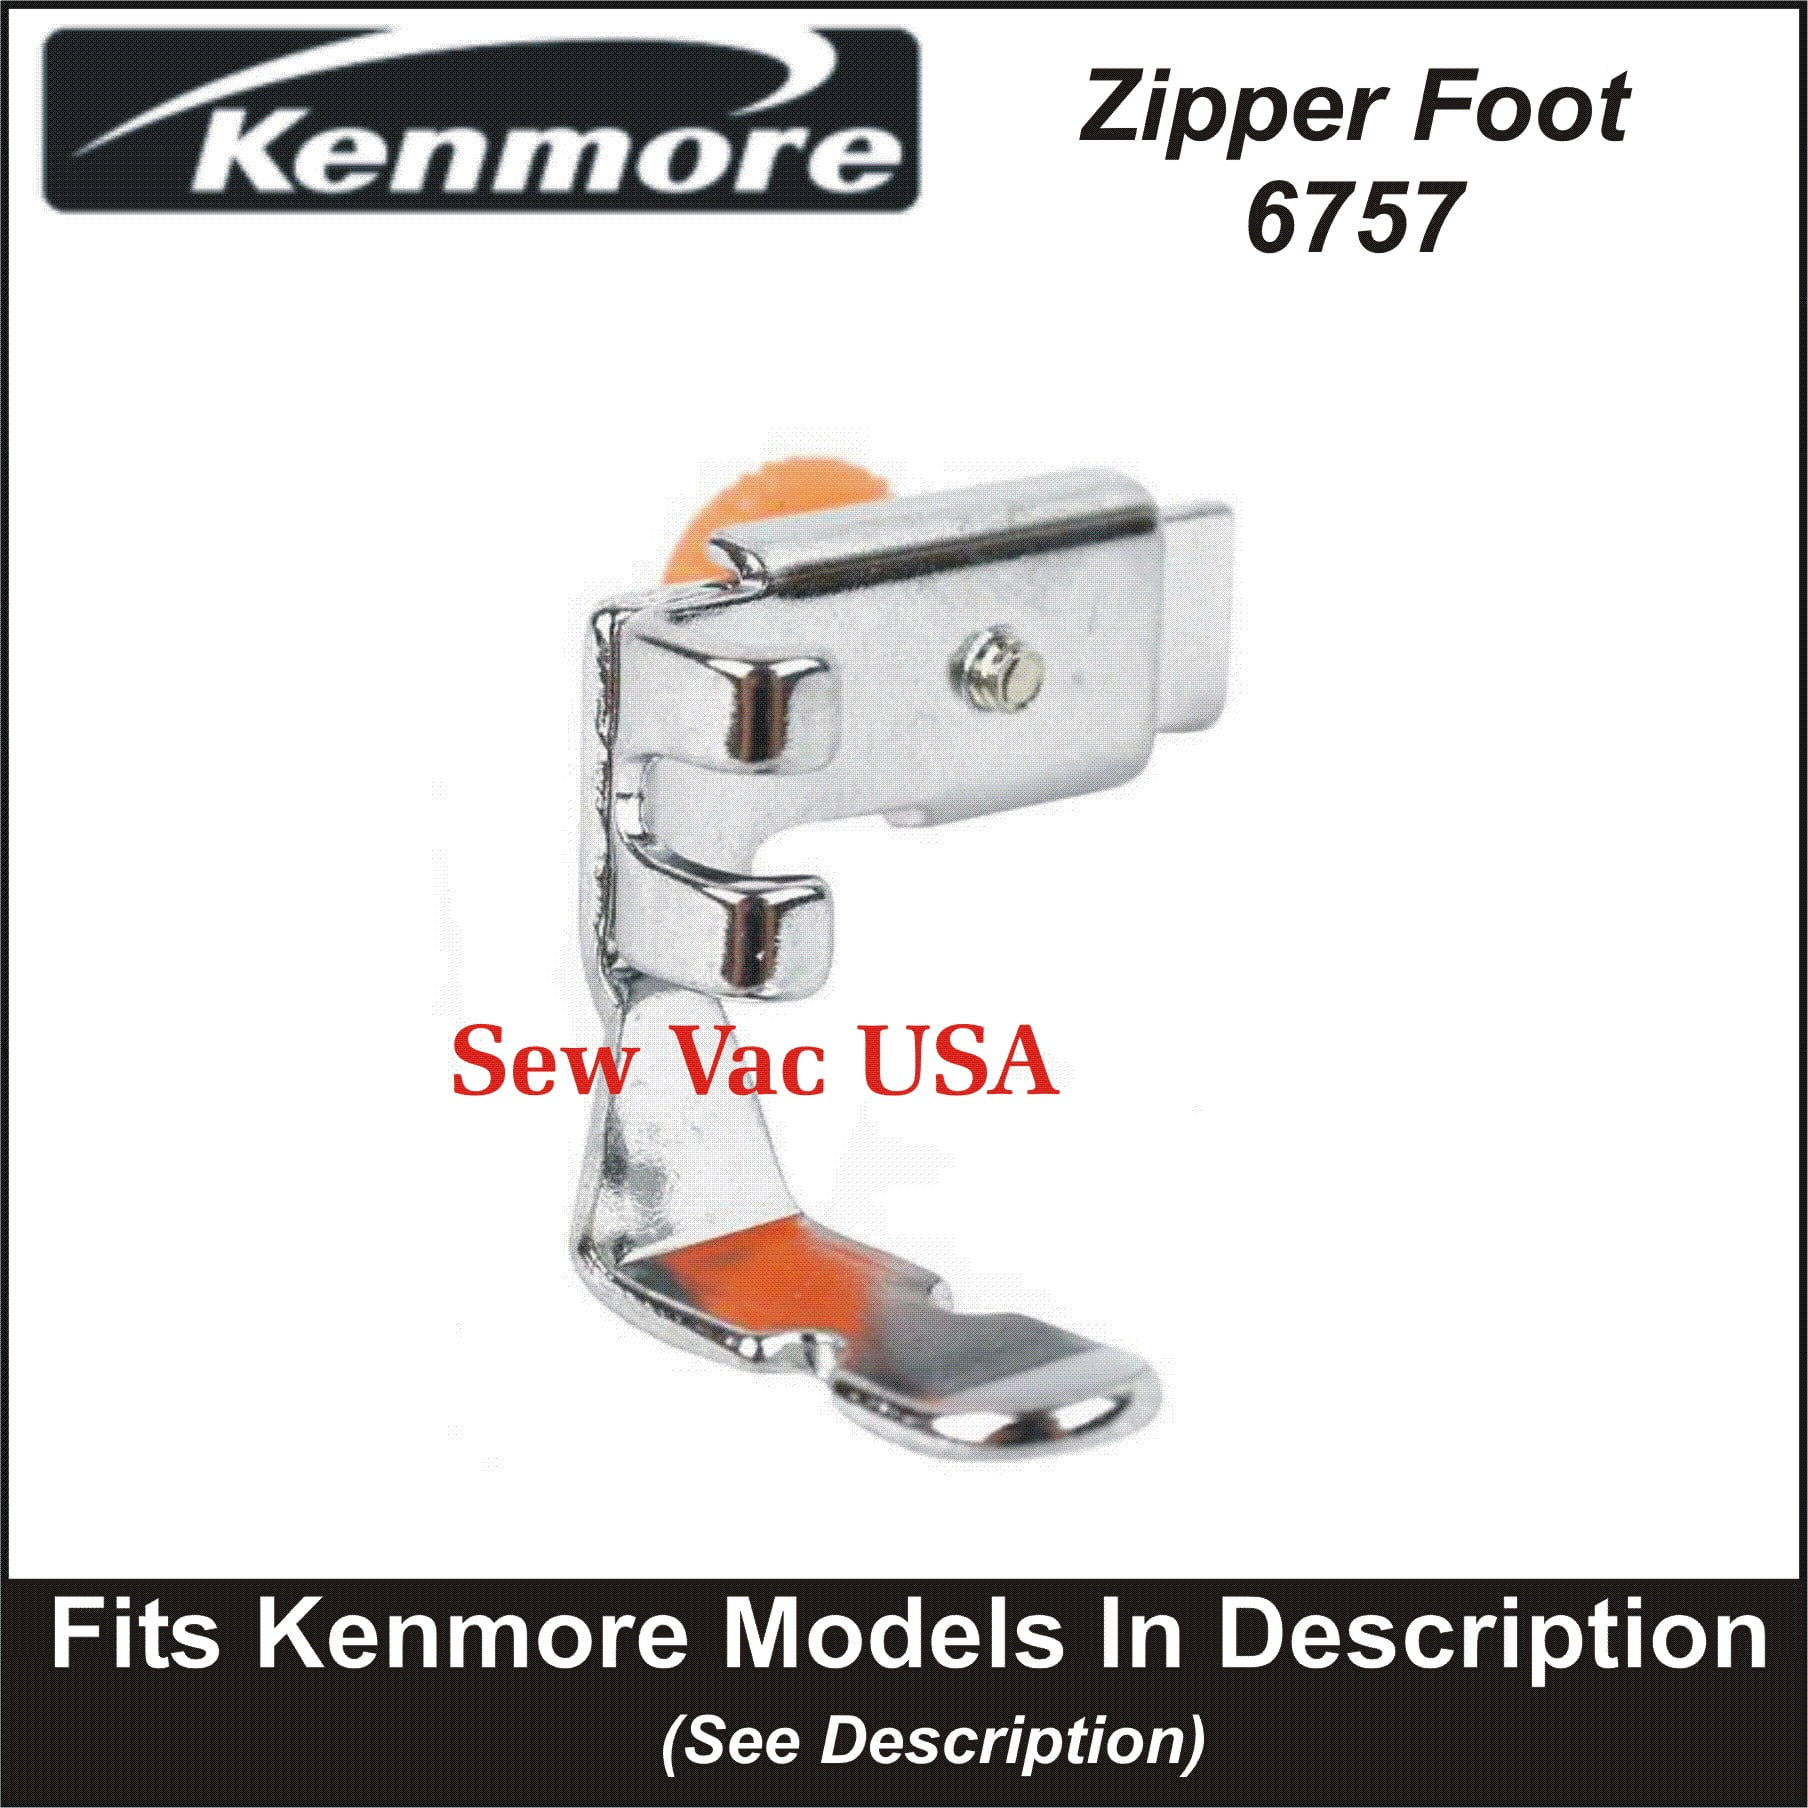 Narrow Body Zipper Snap-On Foot for Kenmore Sewing Machine fits Most Models*** 